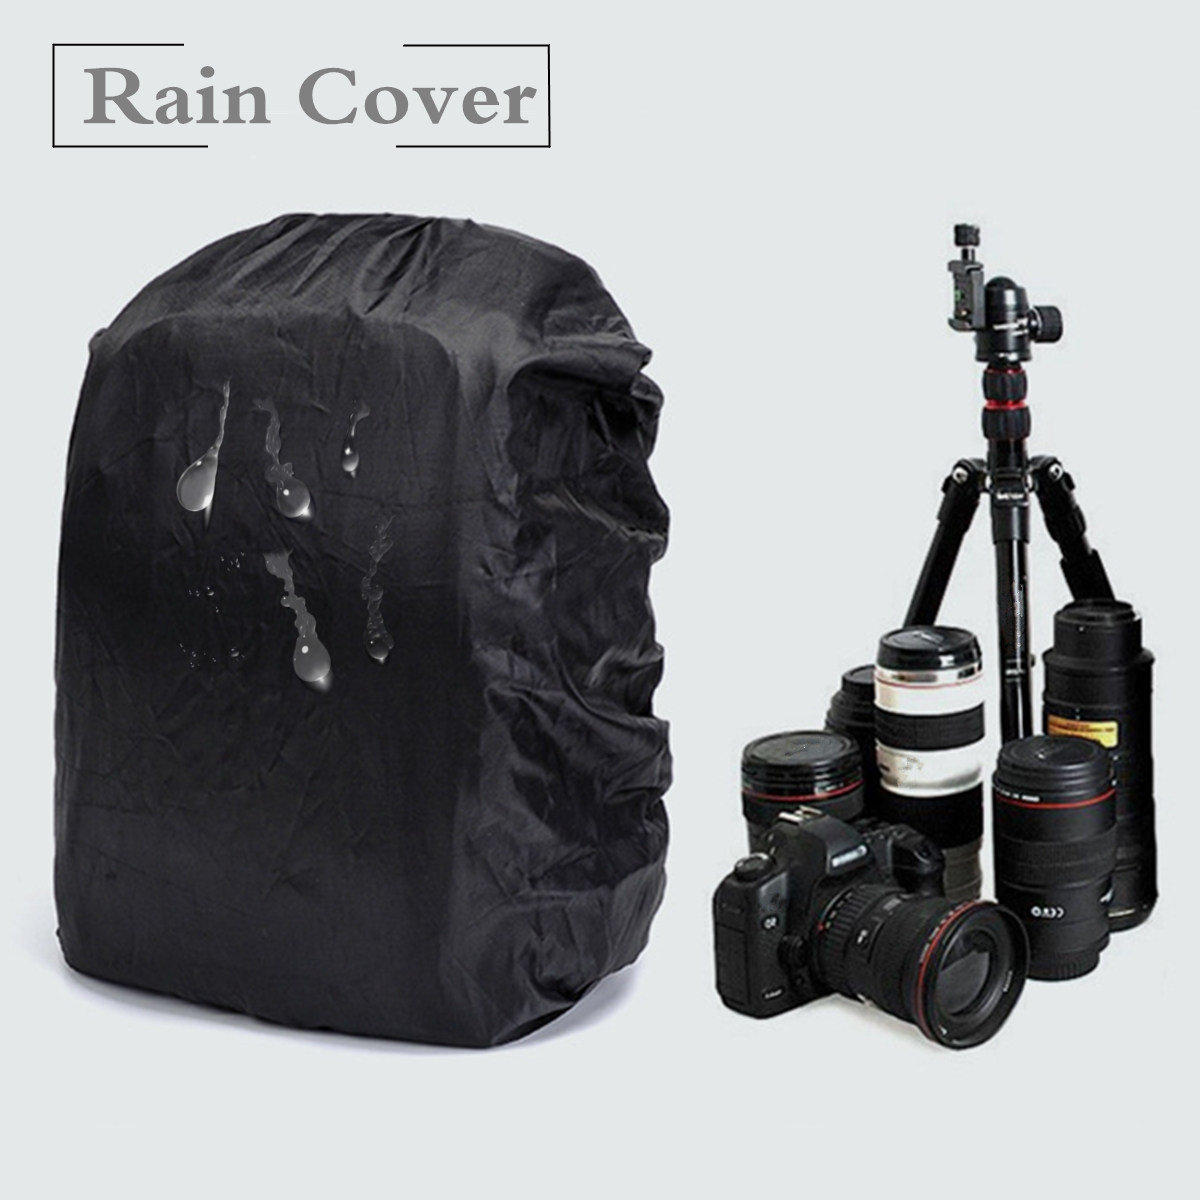 Waterproof Camera Backpack Travel DSLR Bag W/ Rain Cover For Canon Sony 40